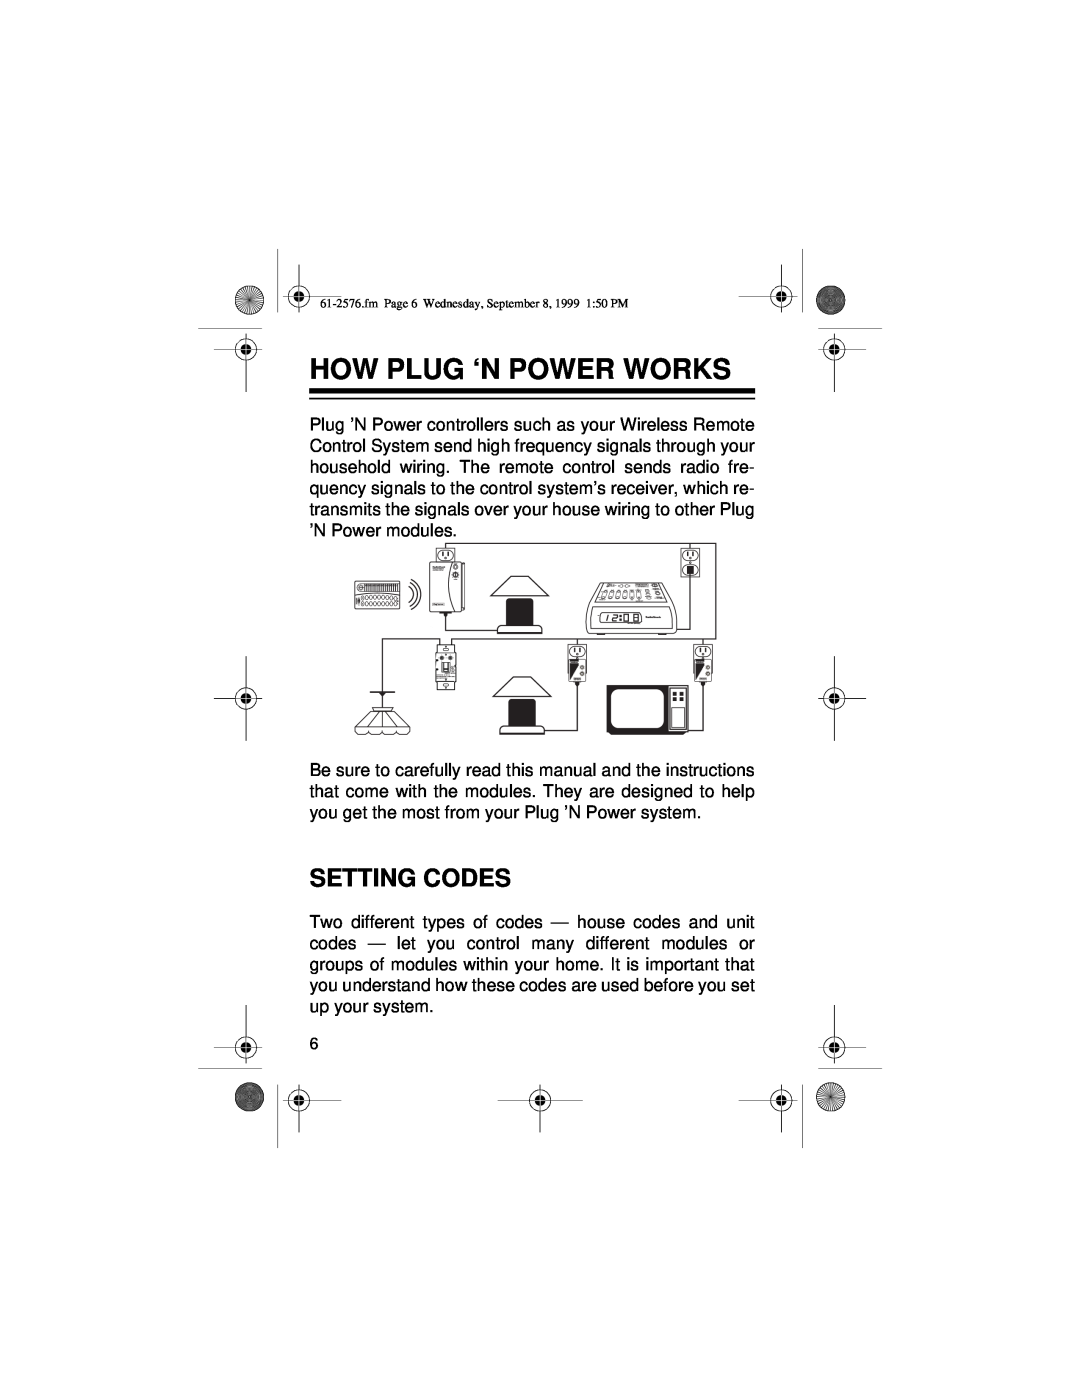 Radio Shack Wireless Remote Control System owner manual How Plug ‘N Power Works, Setting Codes 